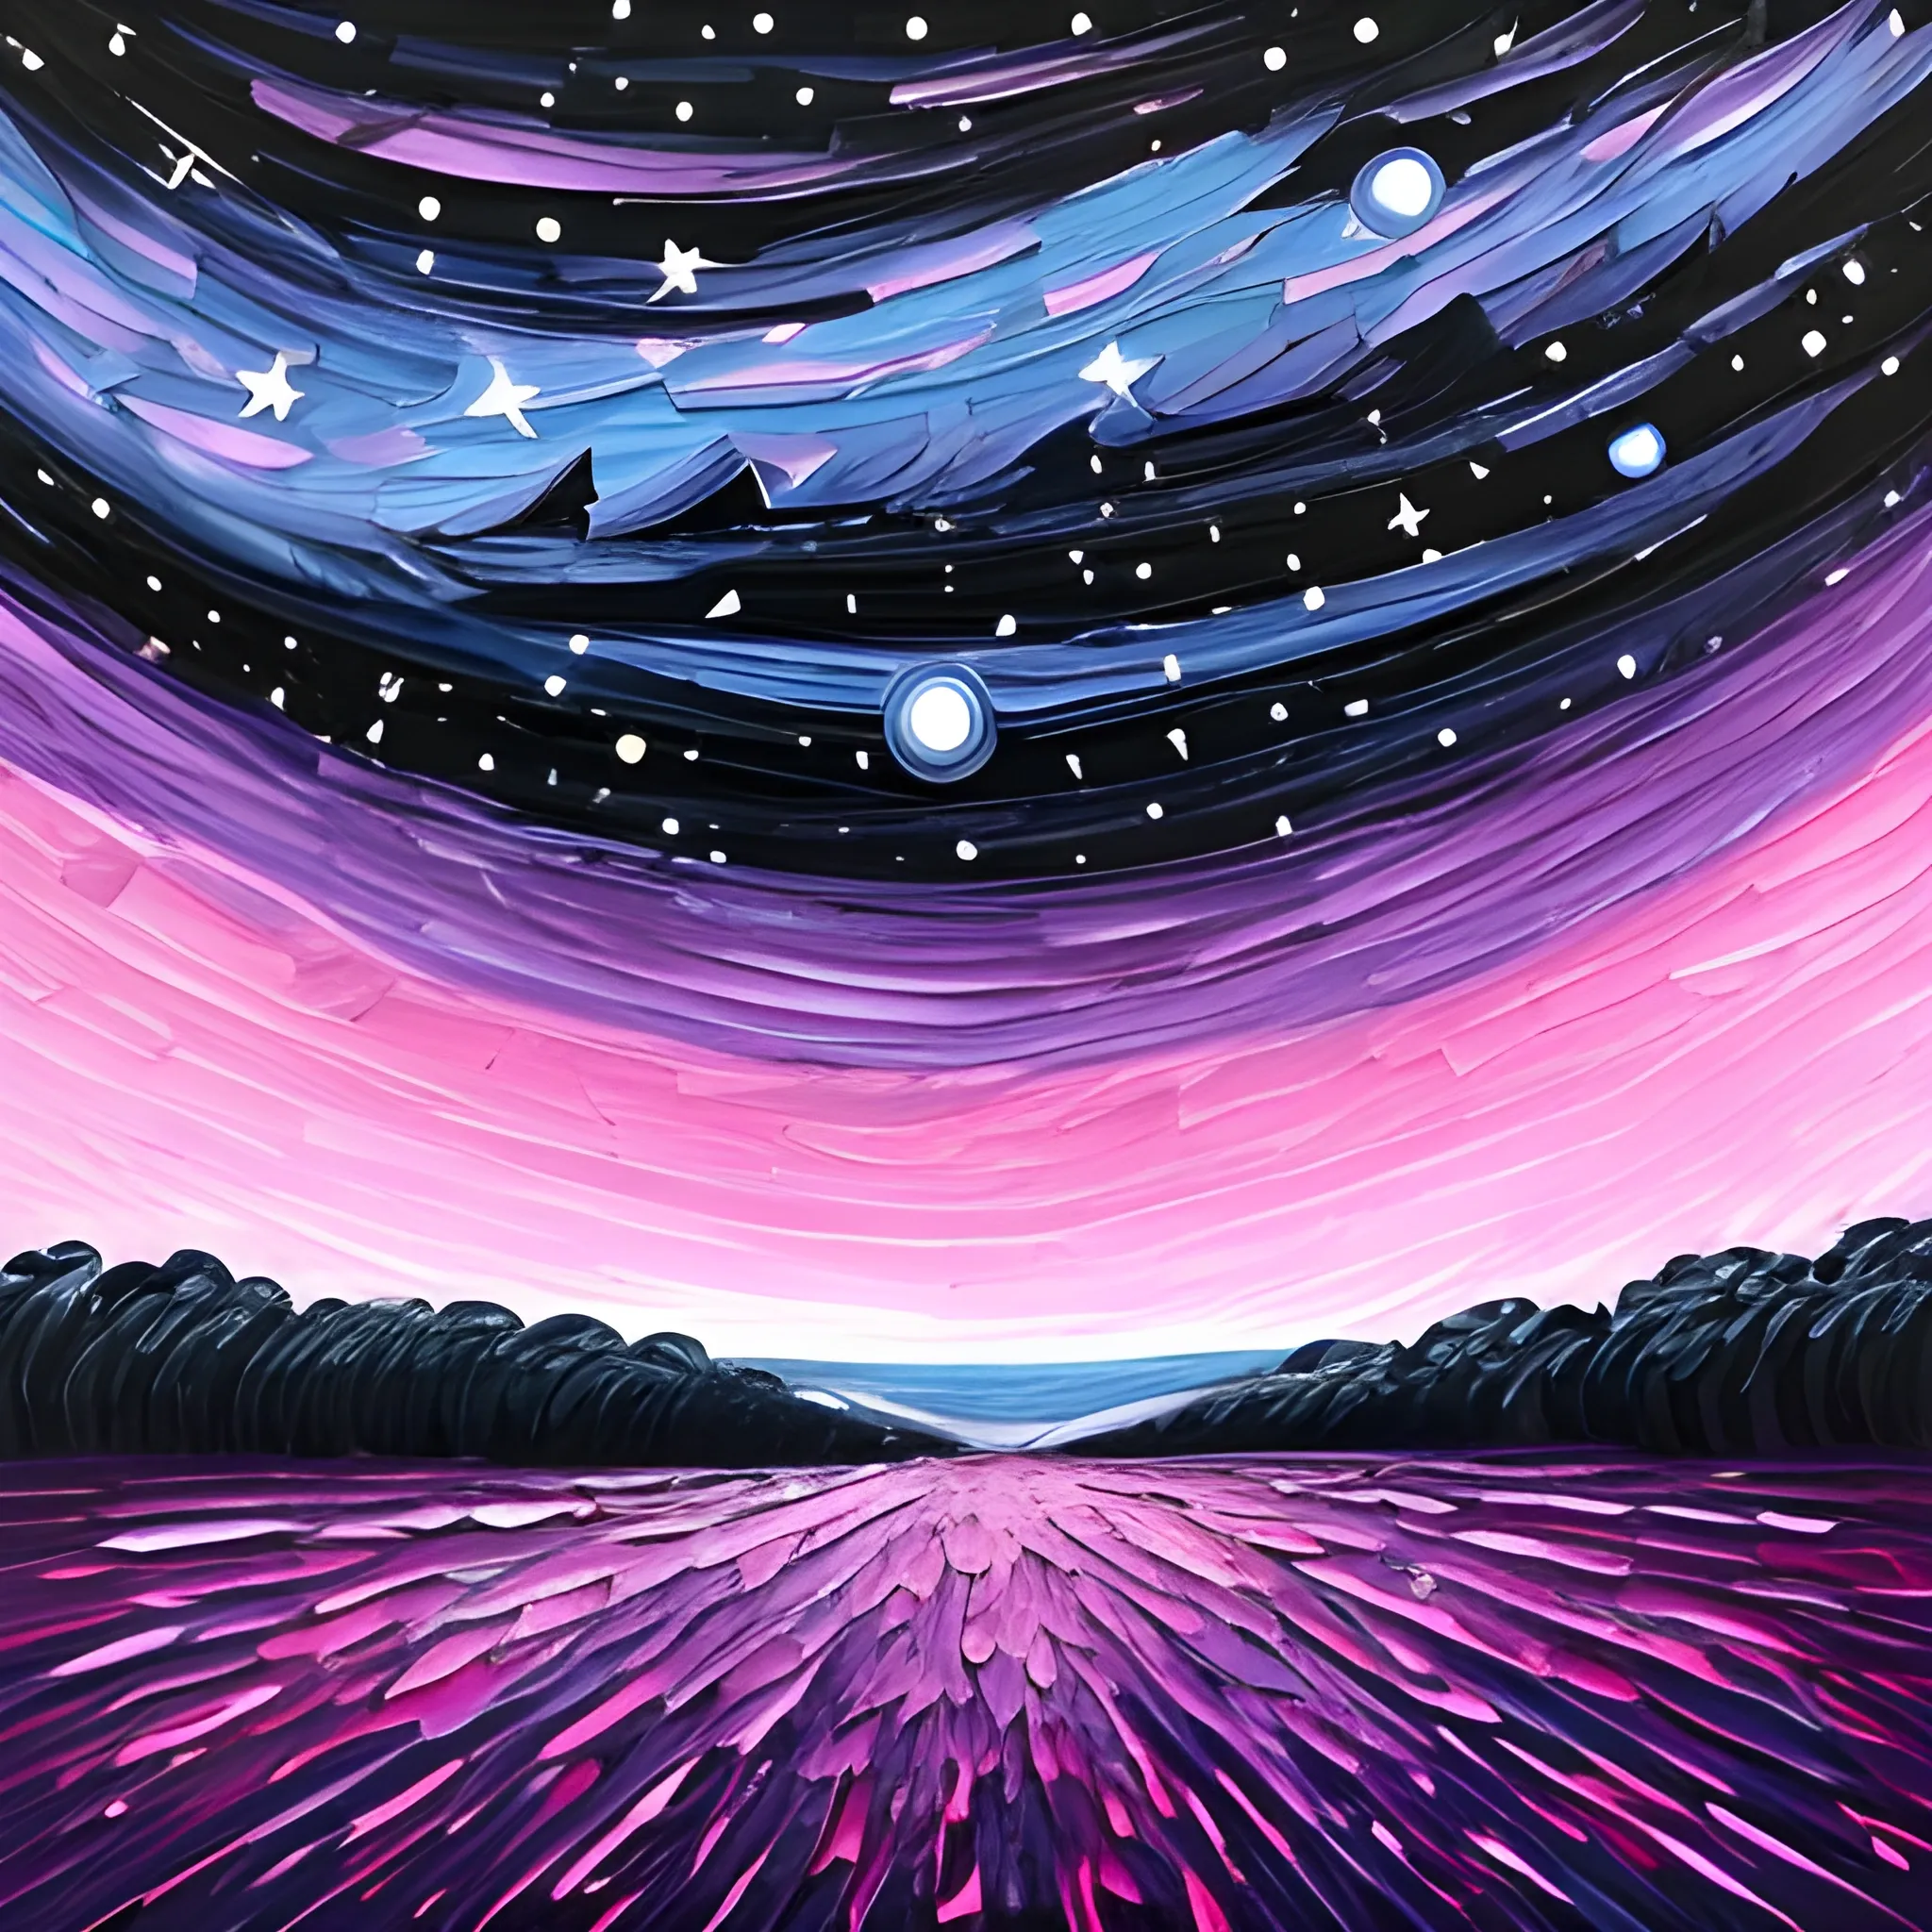 the night starry sky, Cartoon, Oil Painting. Pink, blue and black colors